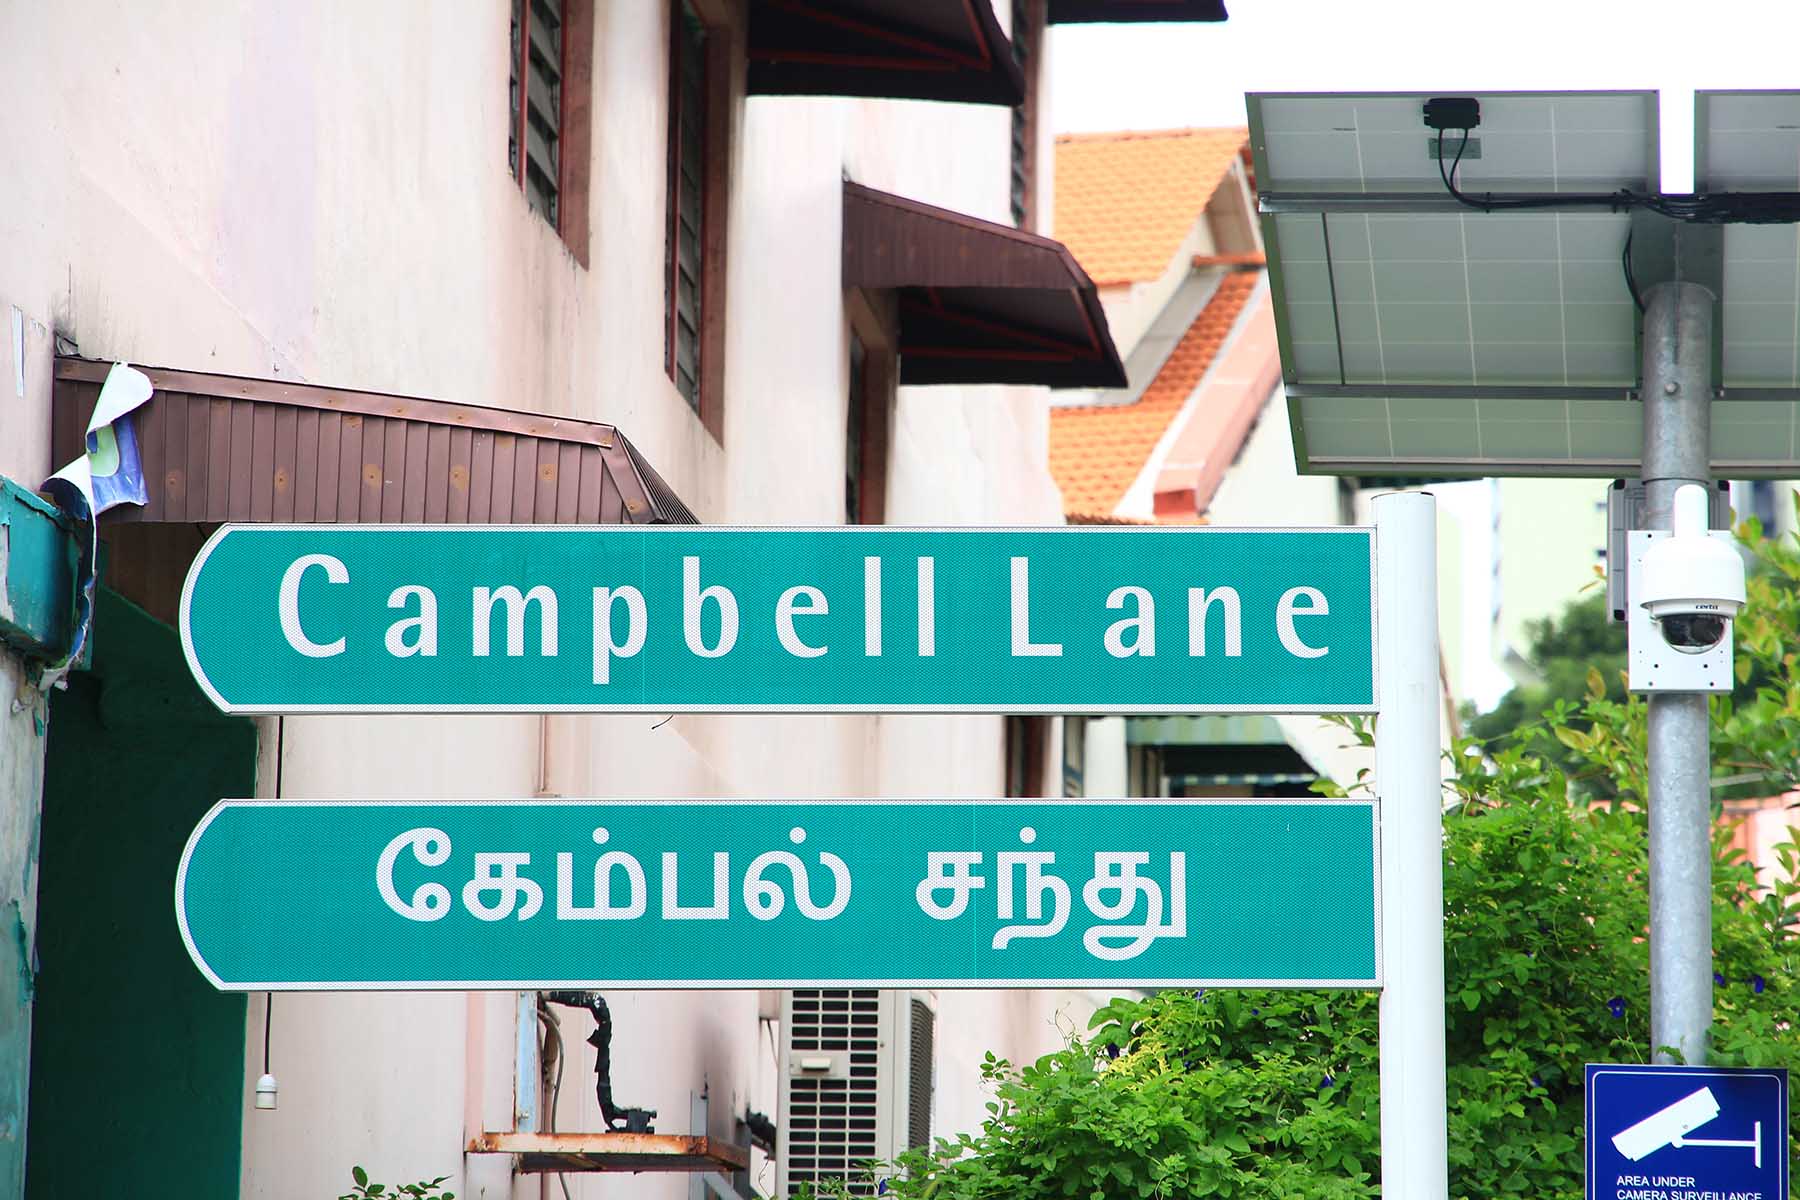 A street sign in Singapore indicating Campbell lane, translated in English and Tamil.